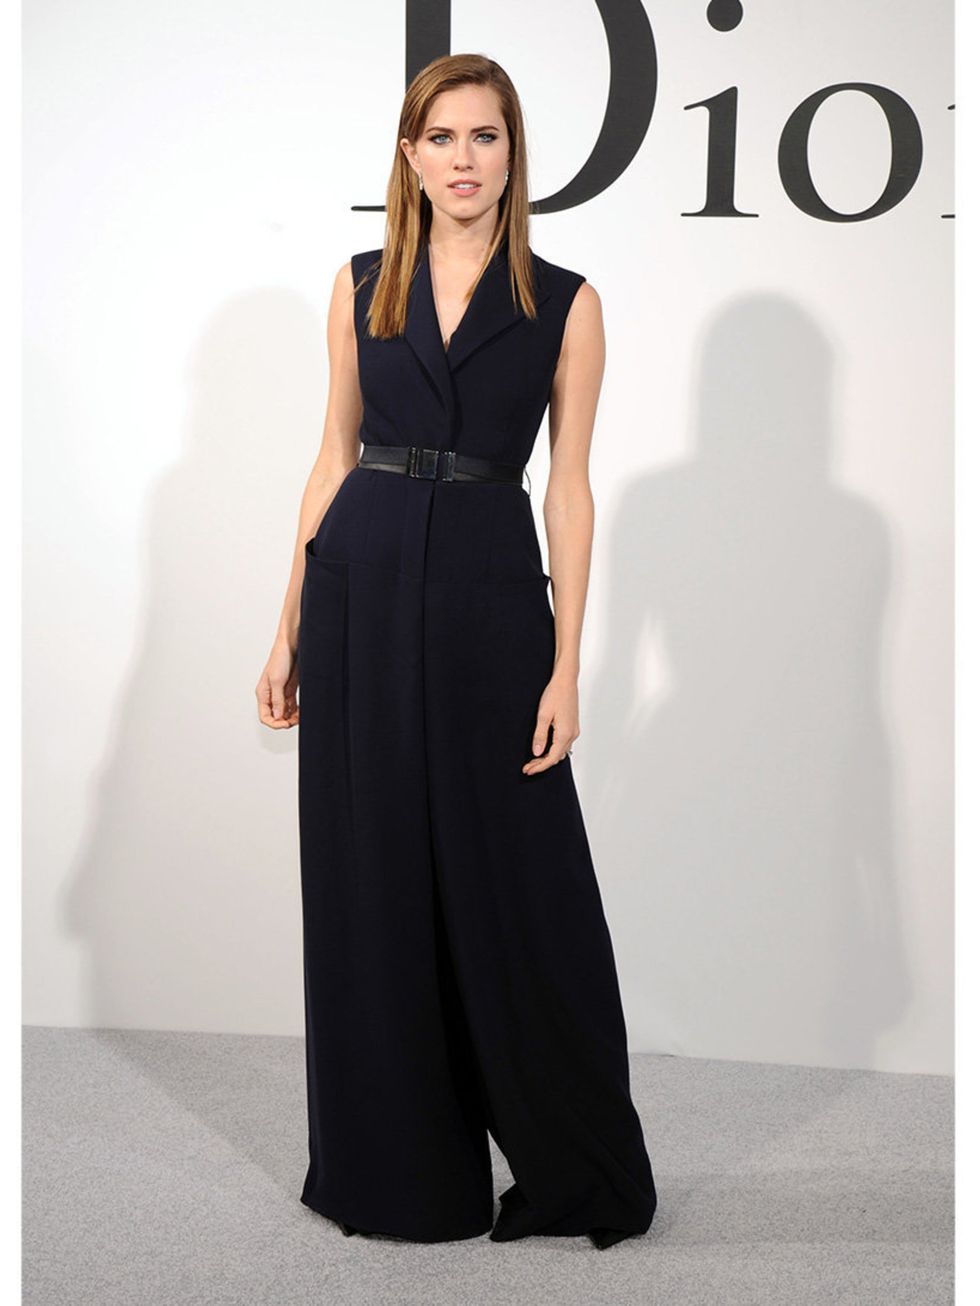 <p>Allison Williams attends the Christian Dior Cruise 2015 show, New York.</p>